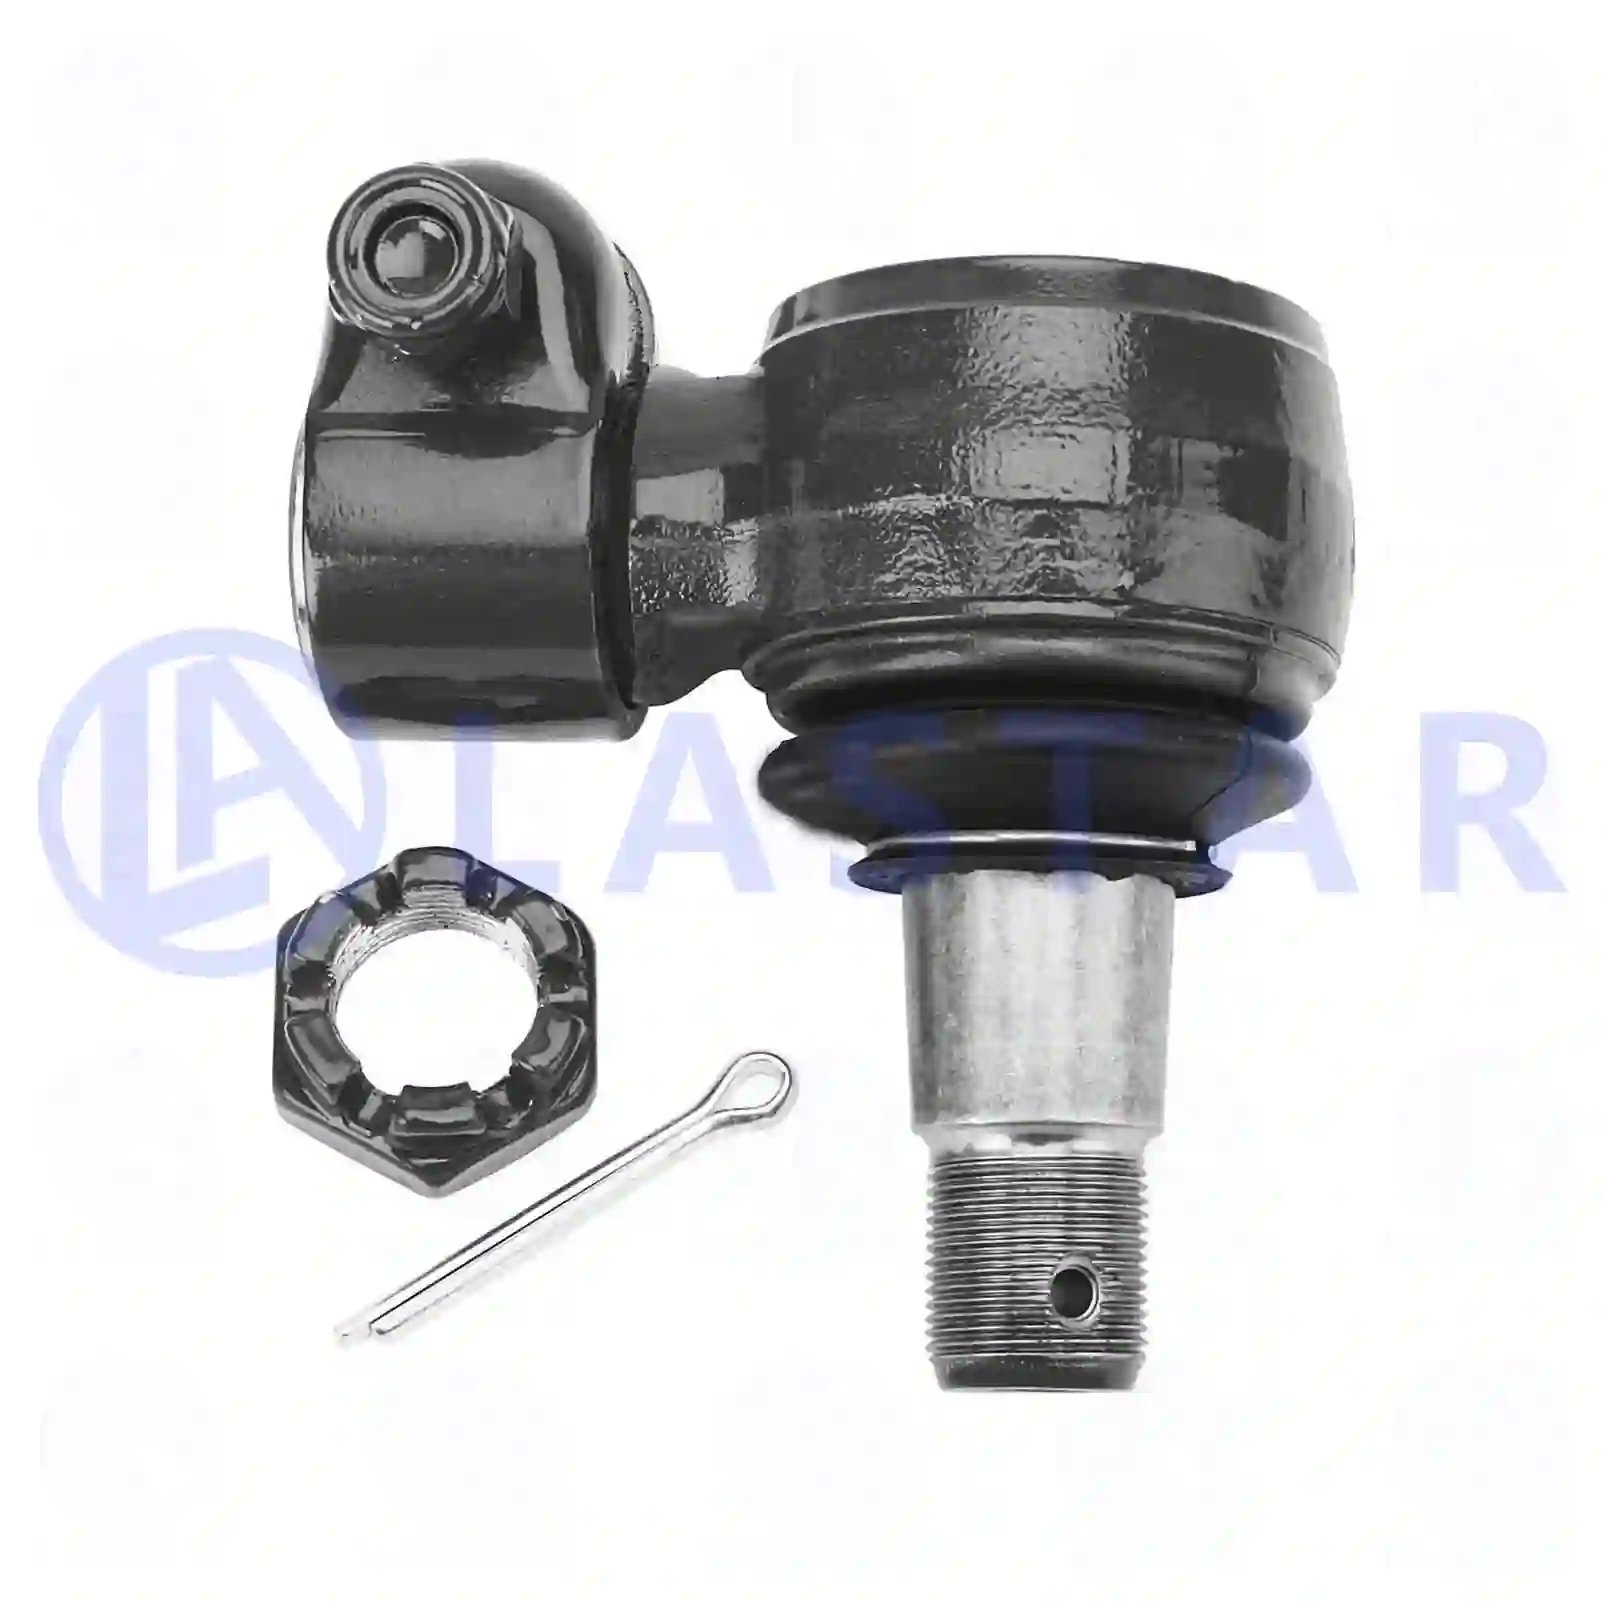 Ball joint, right hand thread, 77705115, 42533101, 81953016281, 81953016337, 82953016016, 0004634529, 0014606948, 5001849880, 1394444, ZG40403-0008 ||  77705115 Lastar Spare Part | Truck Spare Parts, Auotomotive Spare Parts Ball joint, right hand thread, 77705115, 42533101, 81953016281, 81953016337, 82953016016, 0004634529, 0014606948, 5001849880, 1394444, ZG40403-0008 ||  77705115 Lastar Spare Part | Truck Spare Parts, Auotomotive Spare Parts